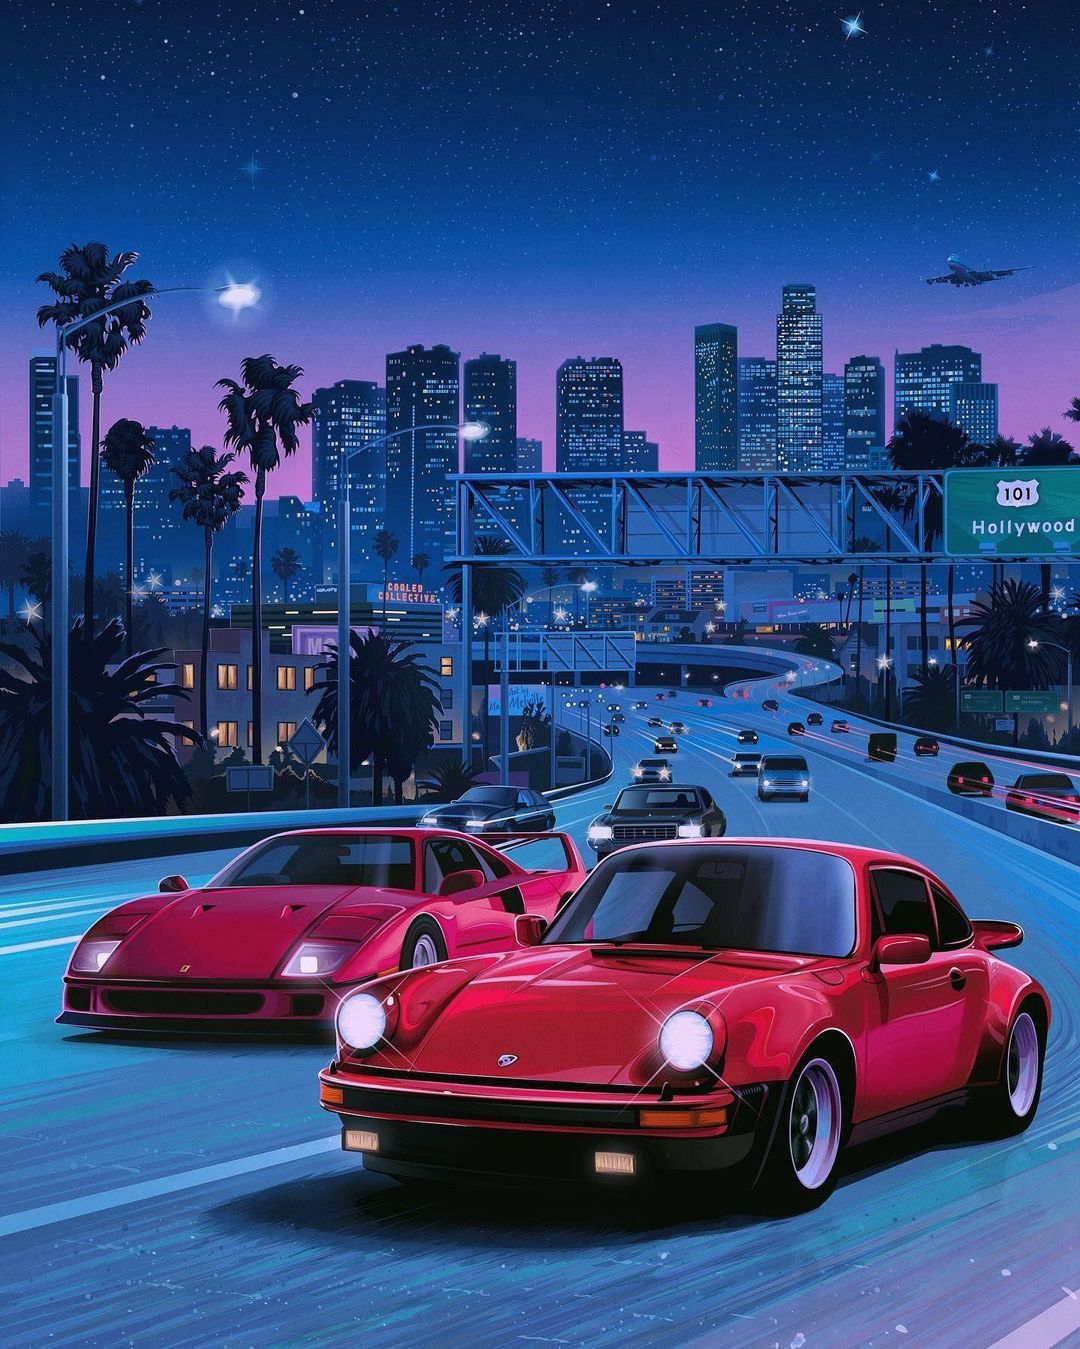 Moonlit drives and 1980s vibes, courtesy of Mr. Melville